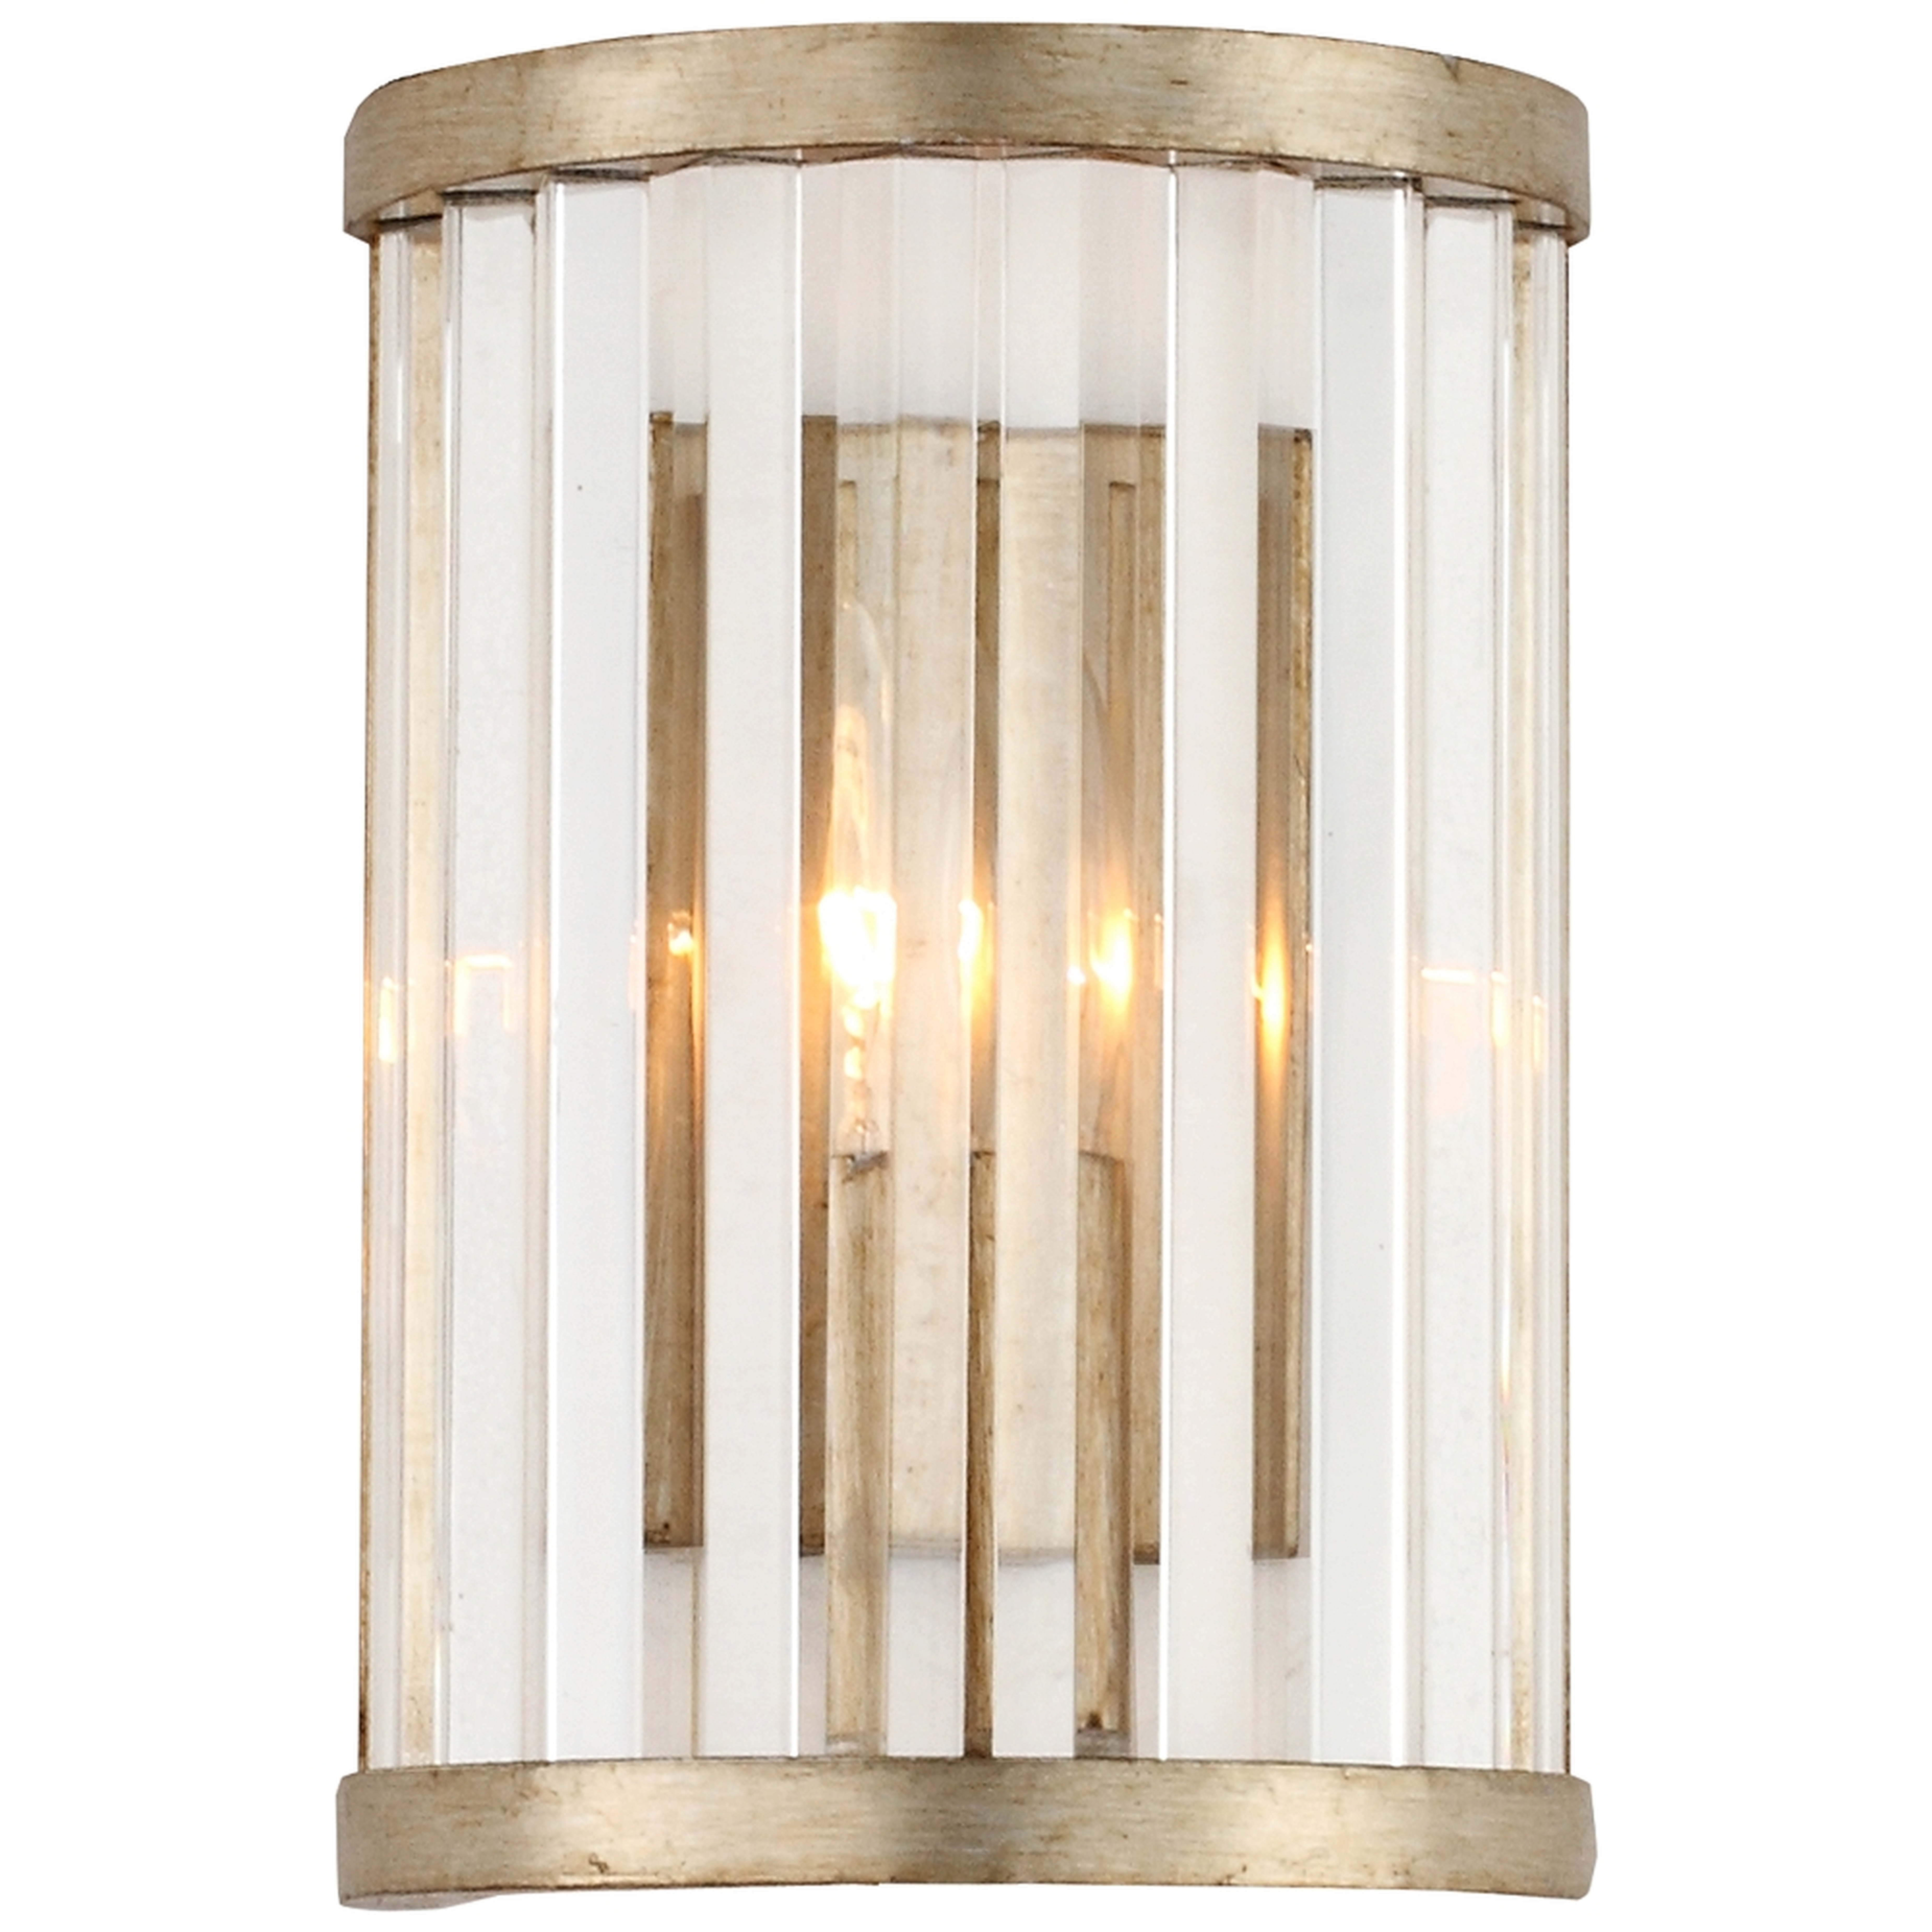 Crystorama Darcy 10" High Distressed Twilight Wall Sconce - Style # 75E06 - Lamps Plus